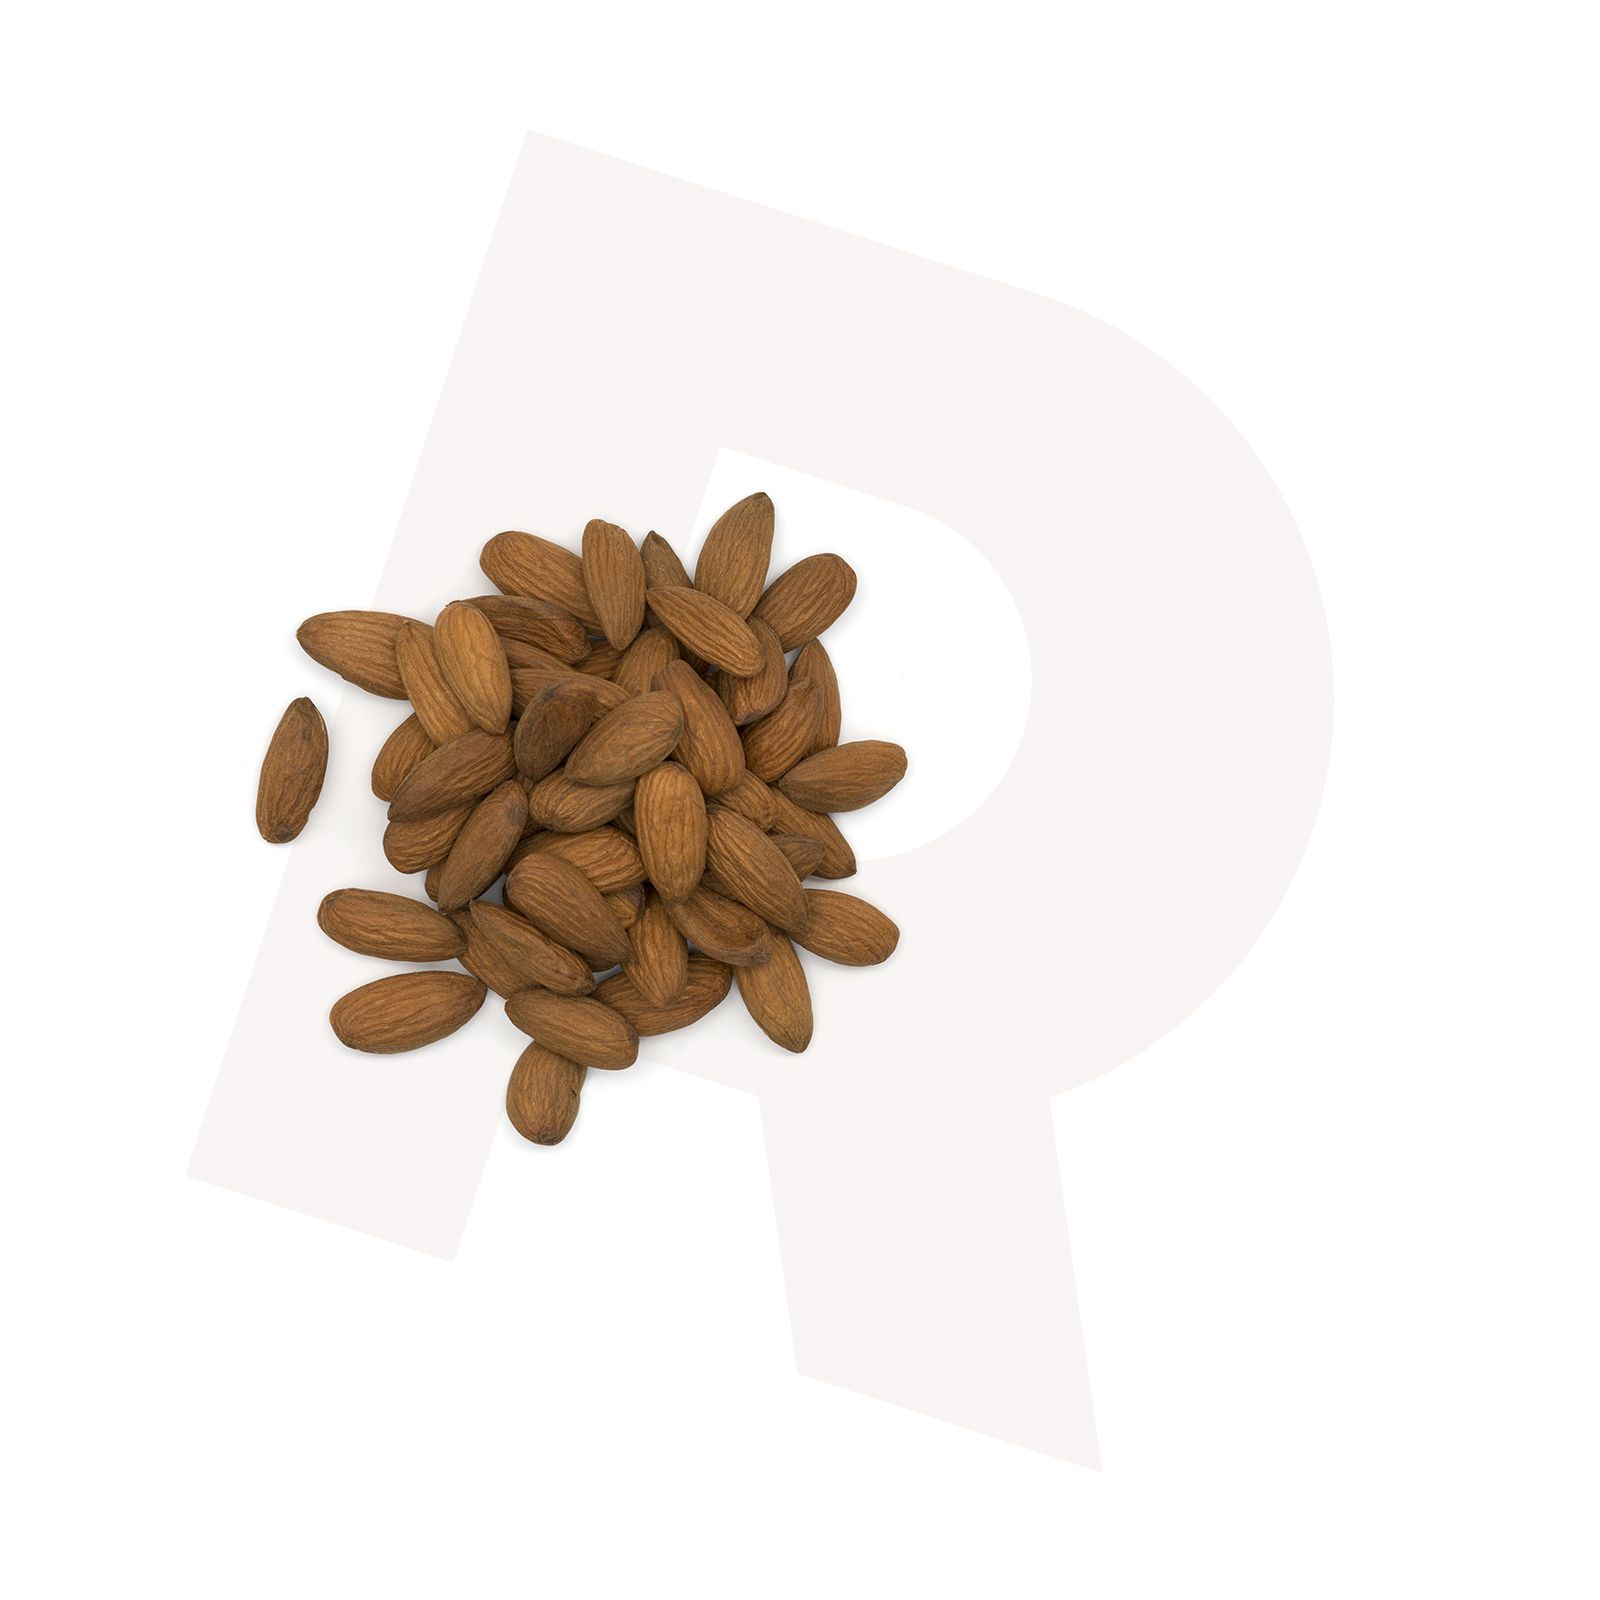 Nuts_Brown-almonds